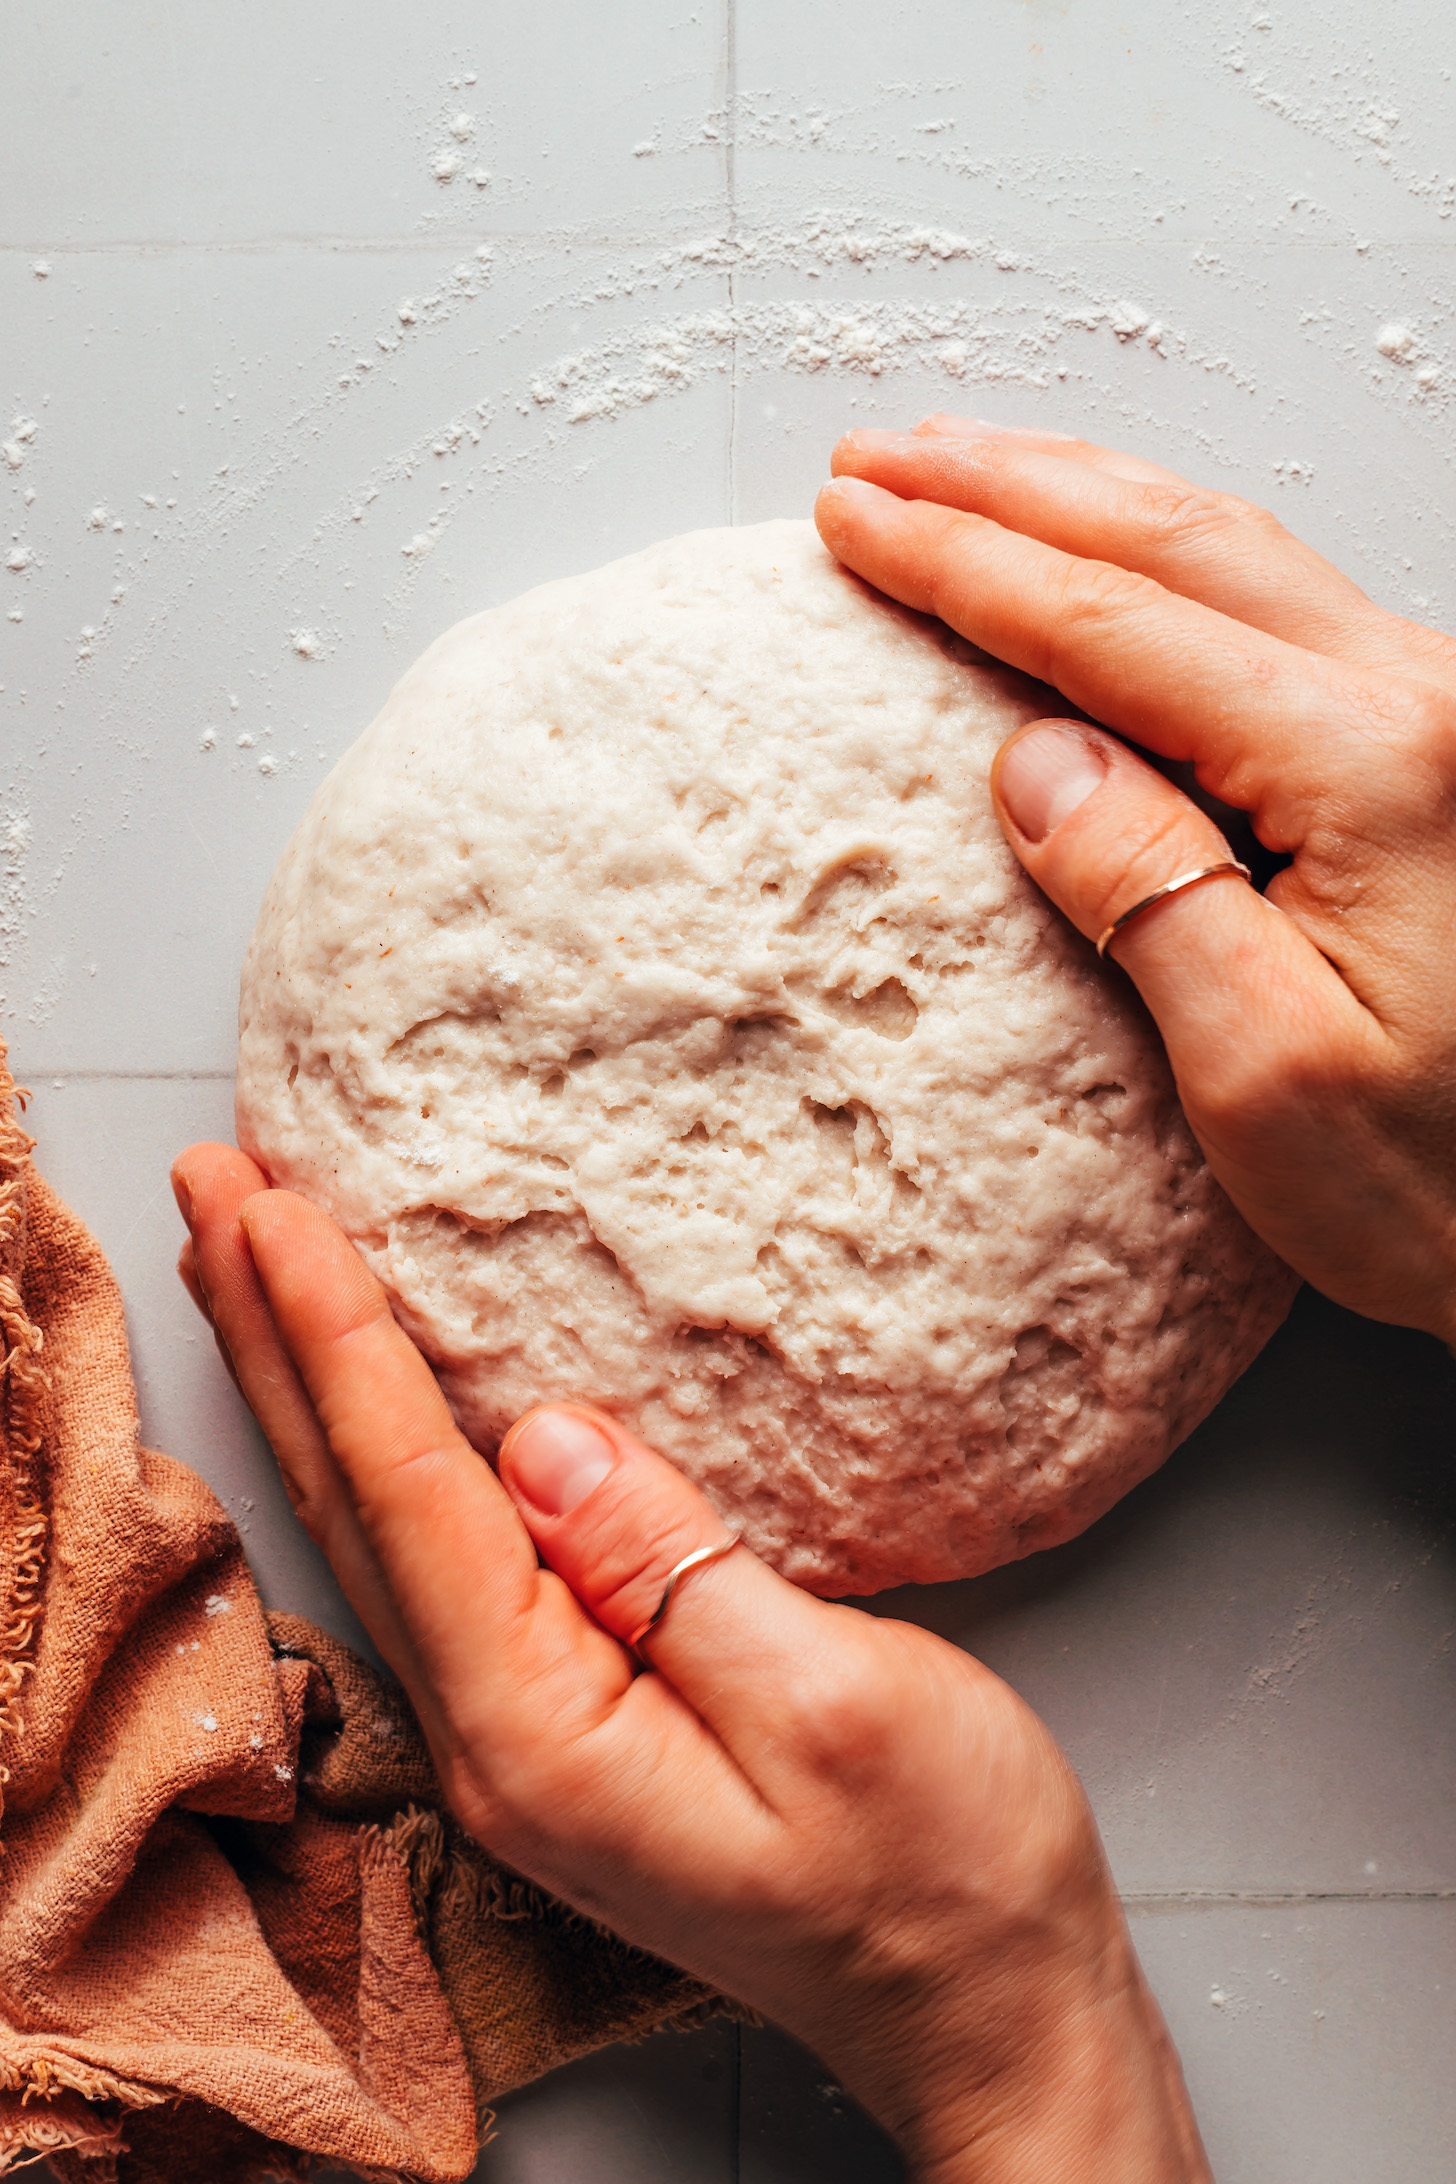 Holding the sides of shaped dough